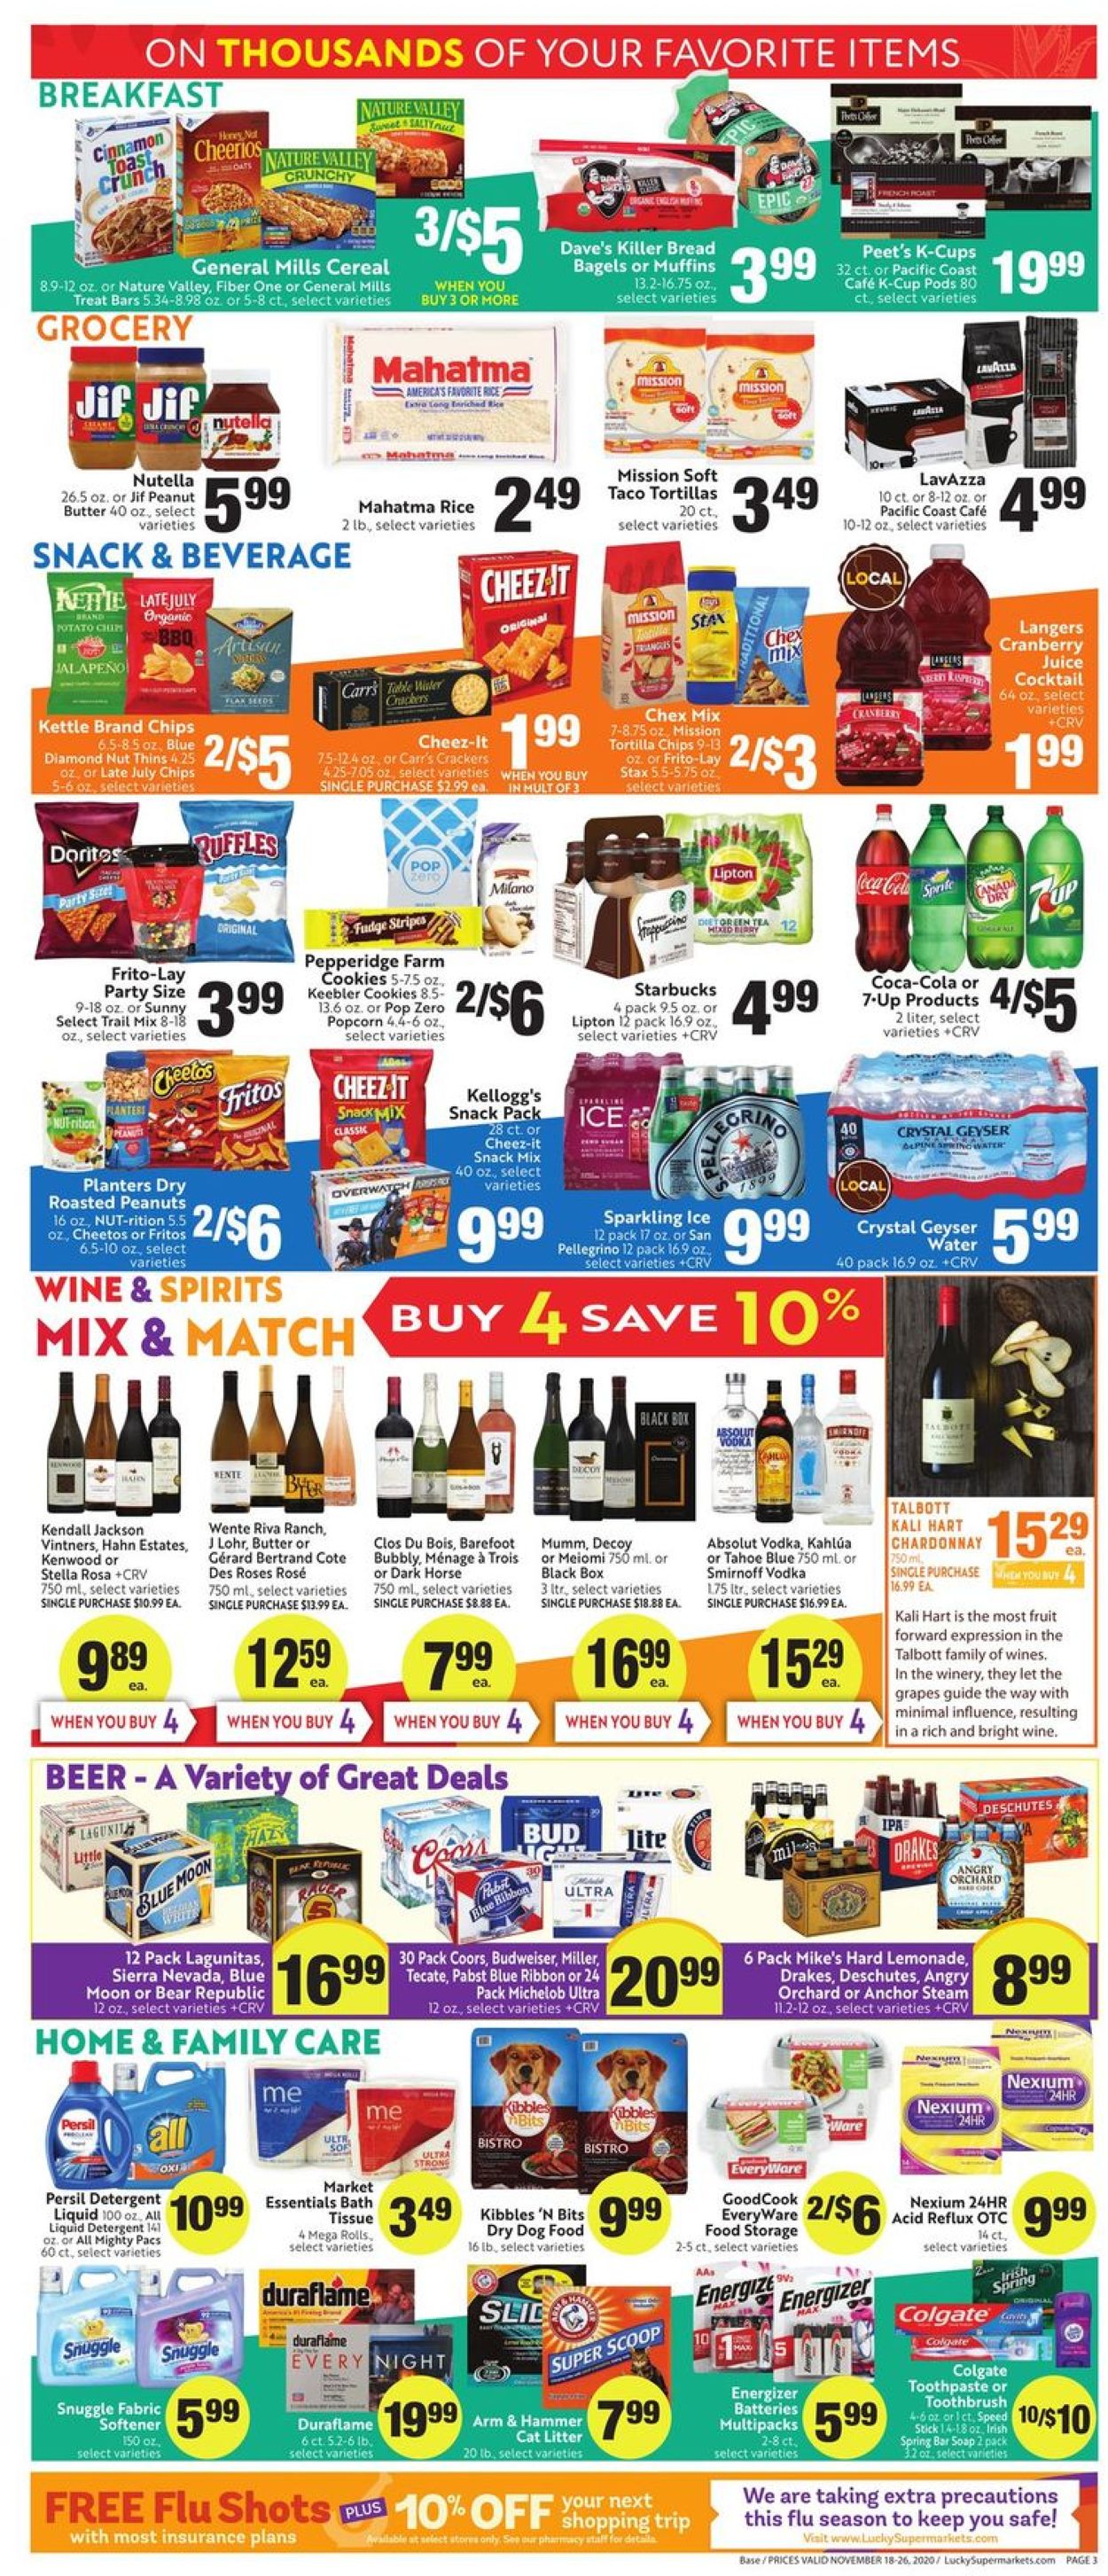 Lucky Supermarkets Thanksgiving ad 2020 Weekly Ad Circular - valid 11/18-11/26/2020 (Page 5)